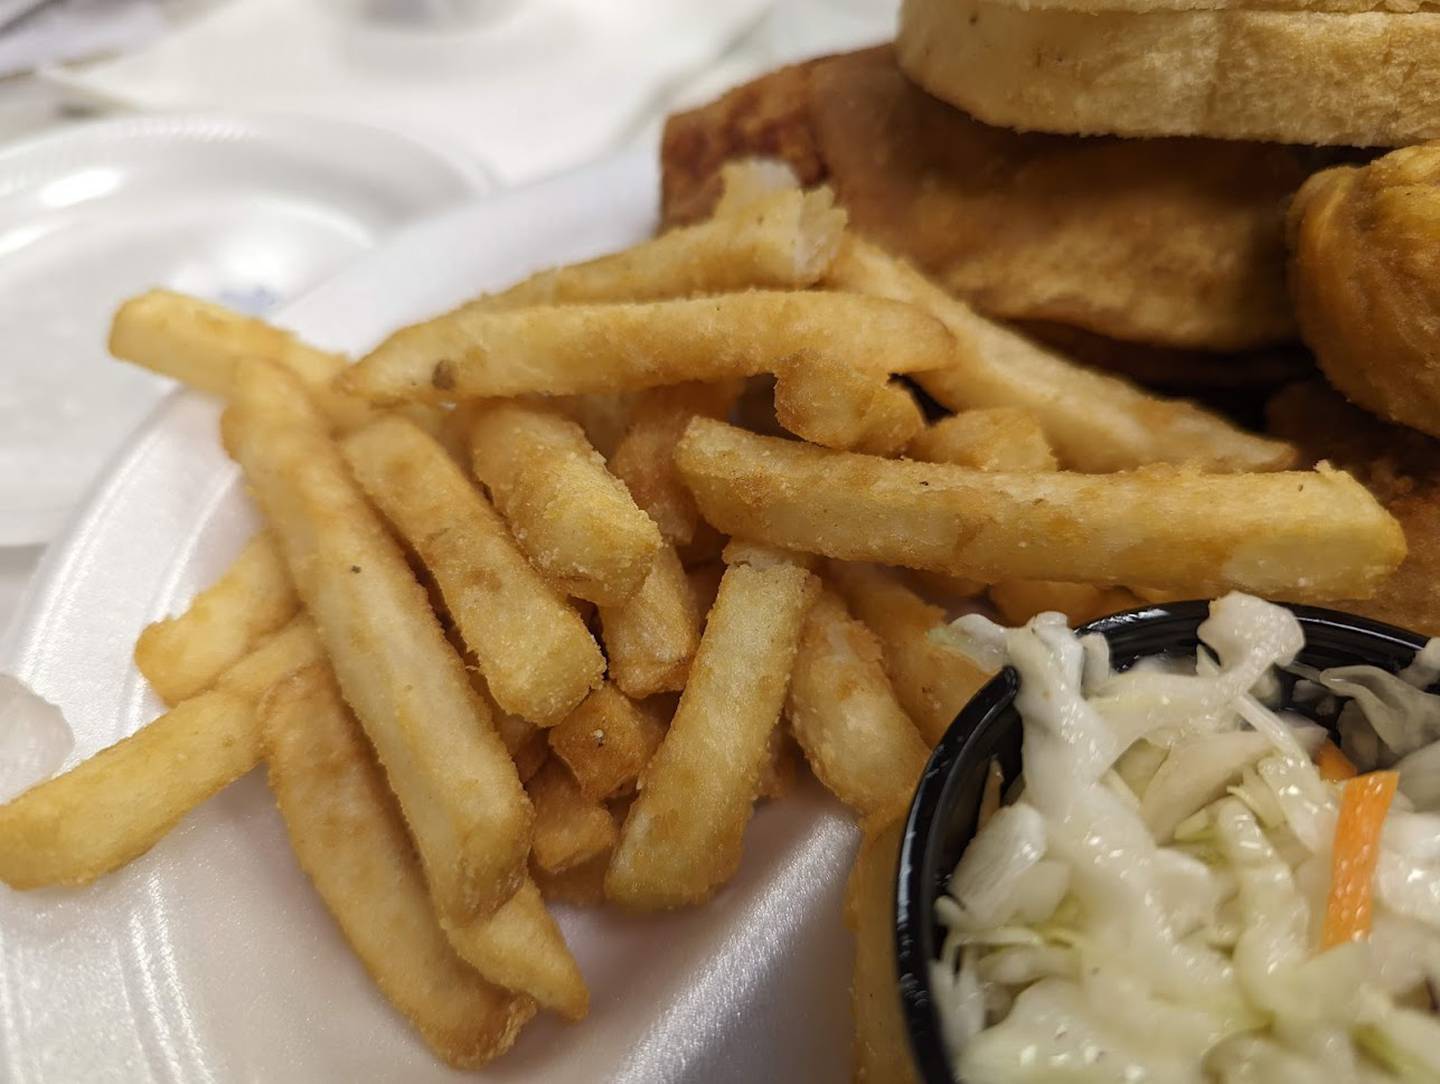 Pictured are the battered fries as part of a half chicken dinner as served at the Knights of Columbus Holy Trinity Council No. 4400 on Joliet's East side. The dinner also came with vinegar cole slaw and two slices of bread.